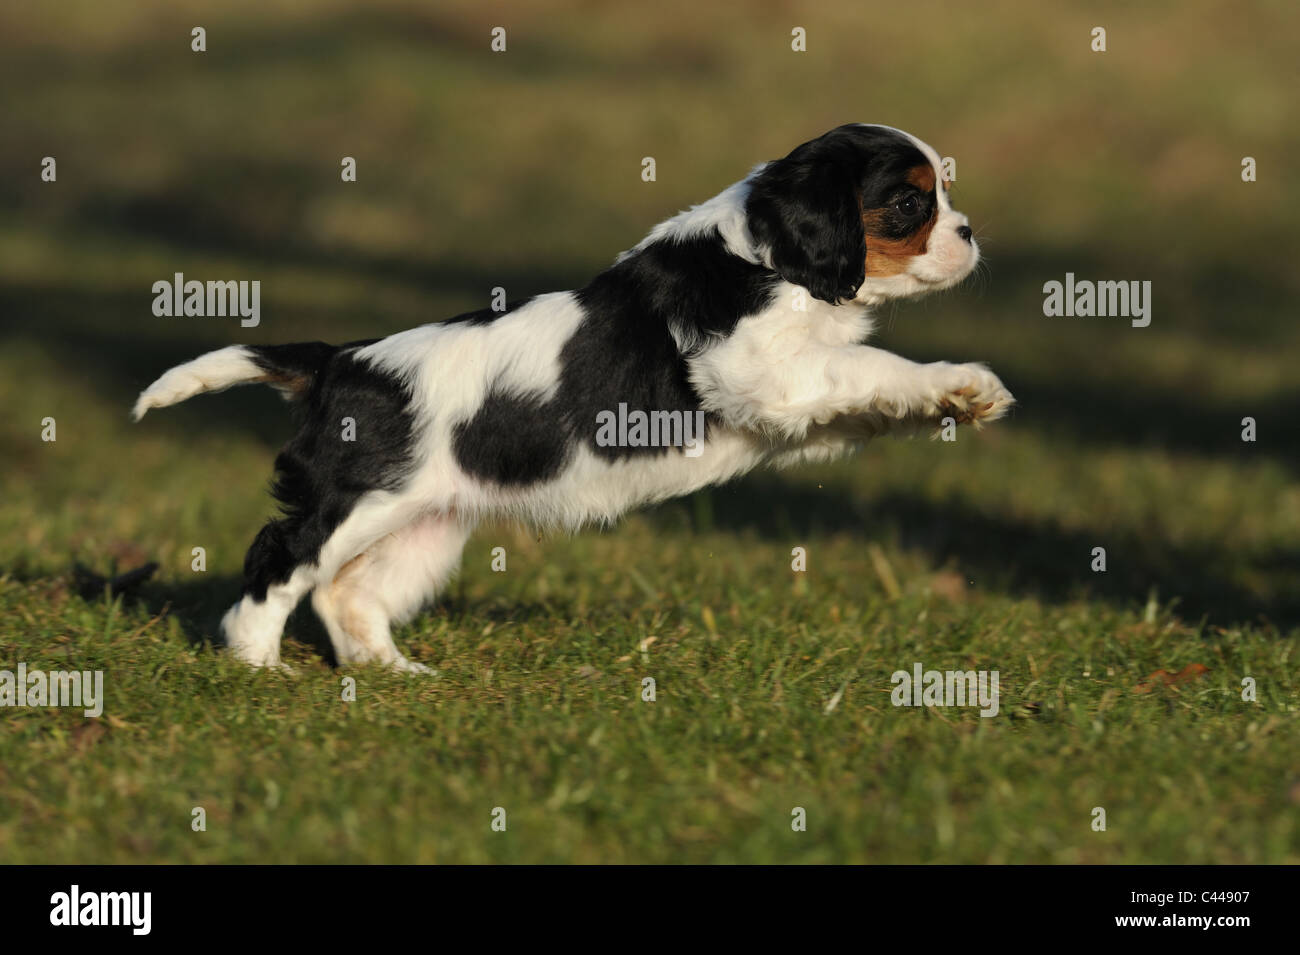 Cavalier King Charles Spaniel (Canis lupus familiaris), puppy running. Stock Photo